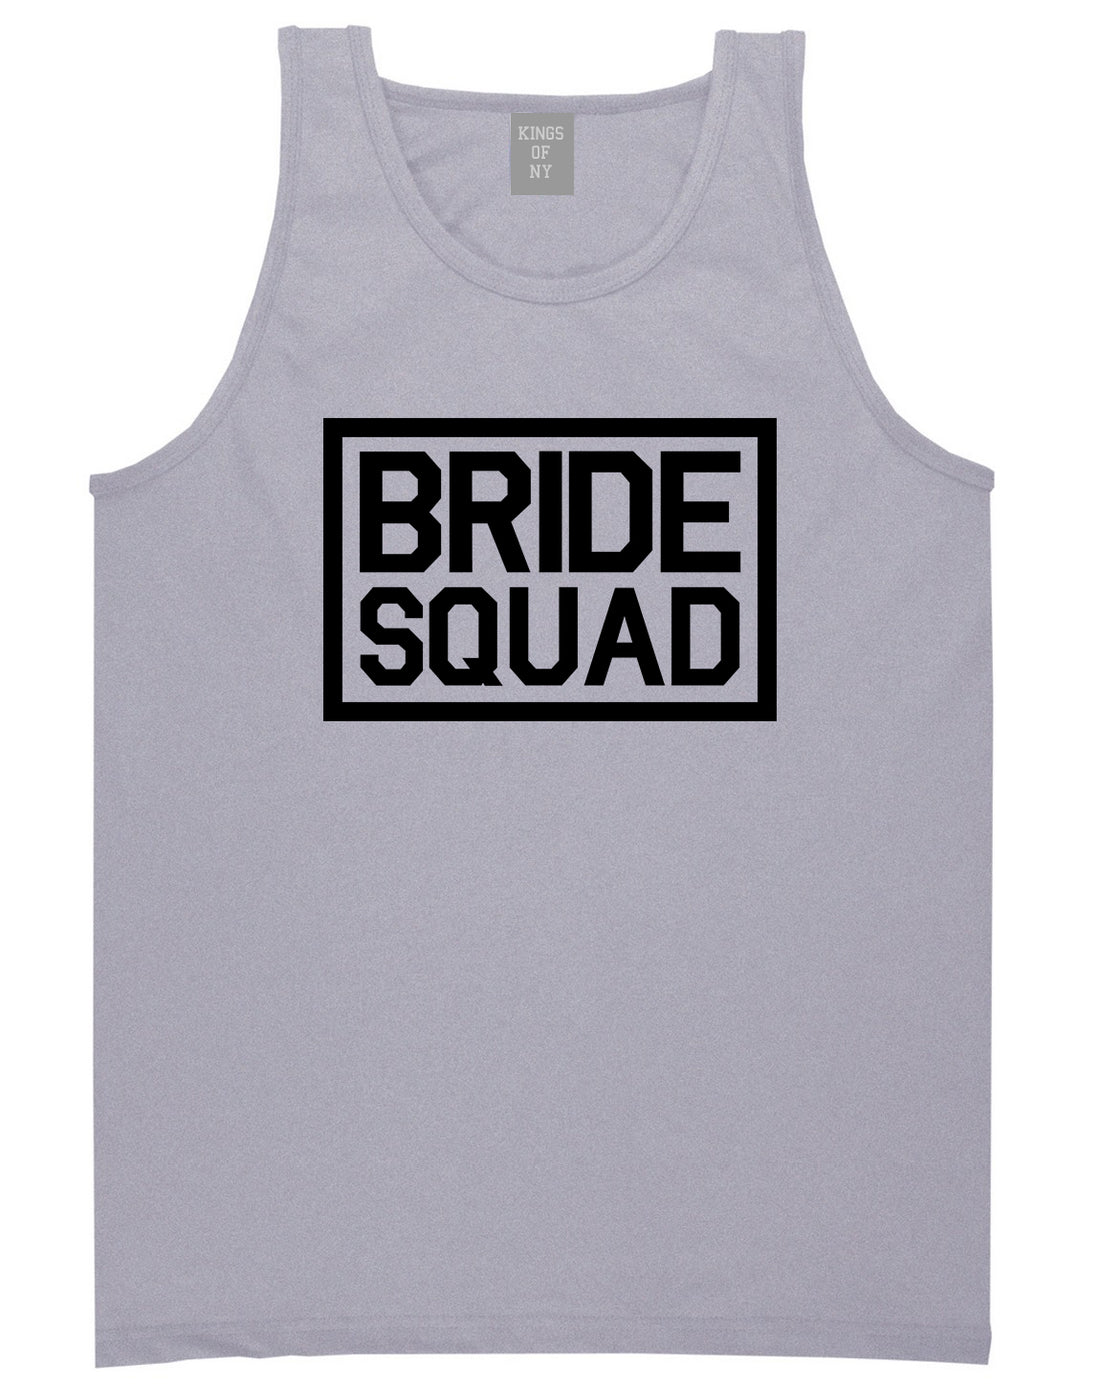 Bride Squad Bachlorette Party Grey Tank Top Shirt by Kings Of NY